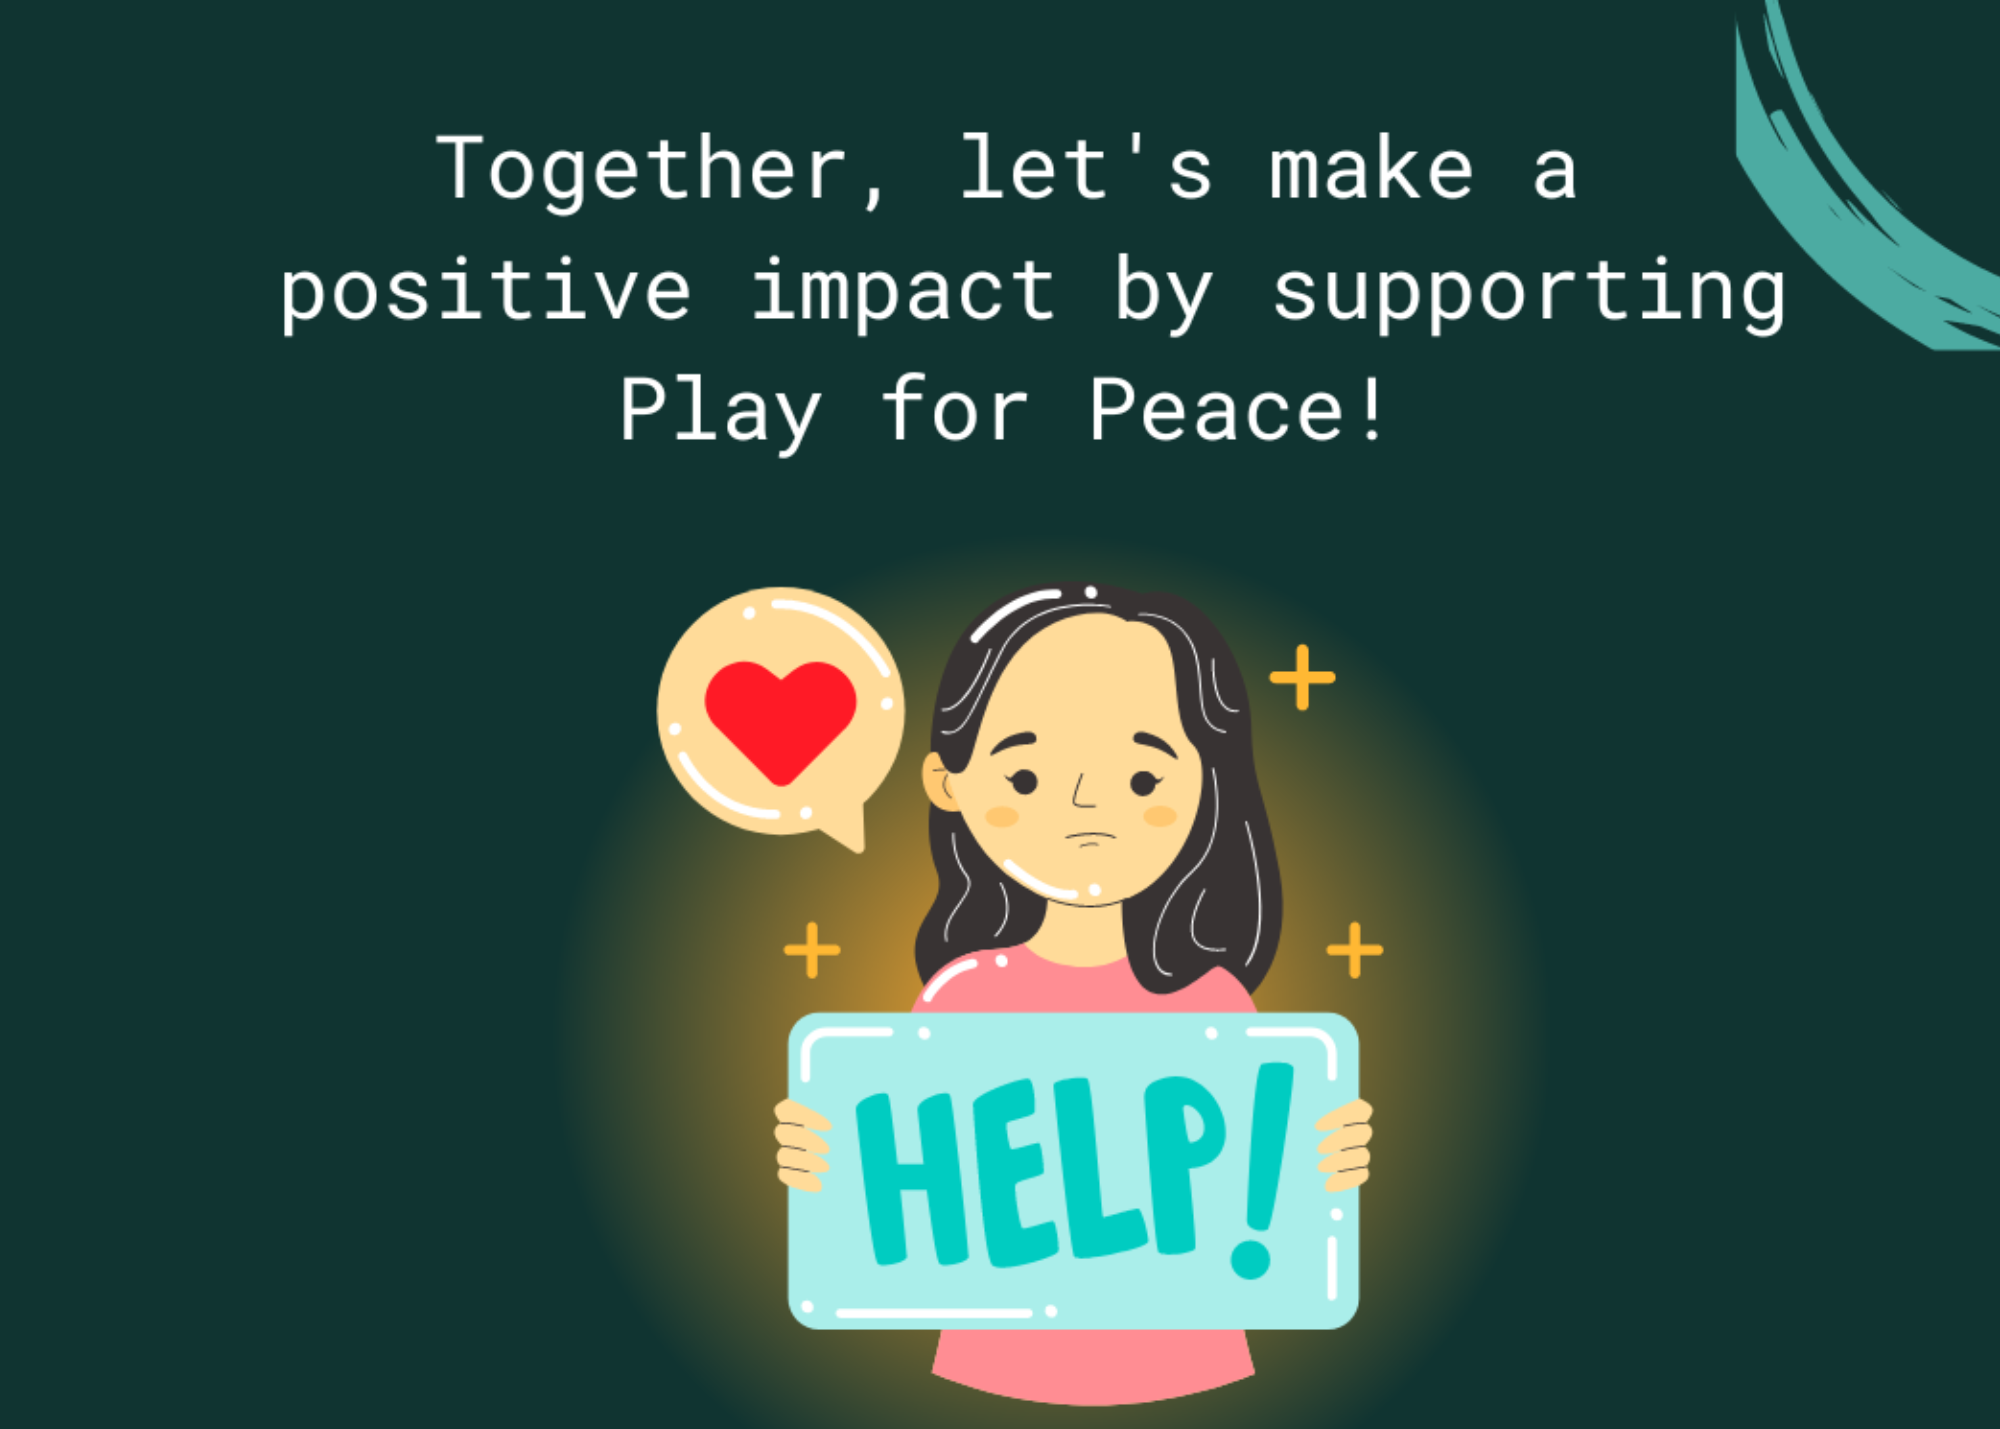 Let's empower youth around the world to create a more peaceful tomorrow!